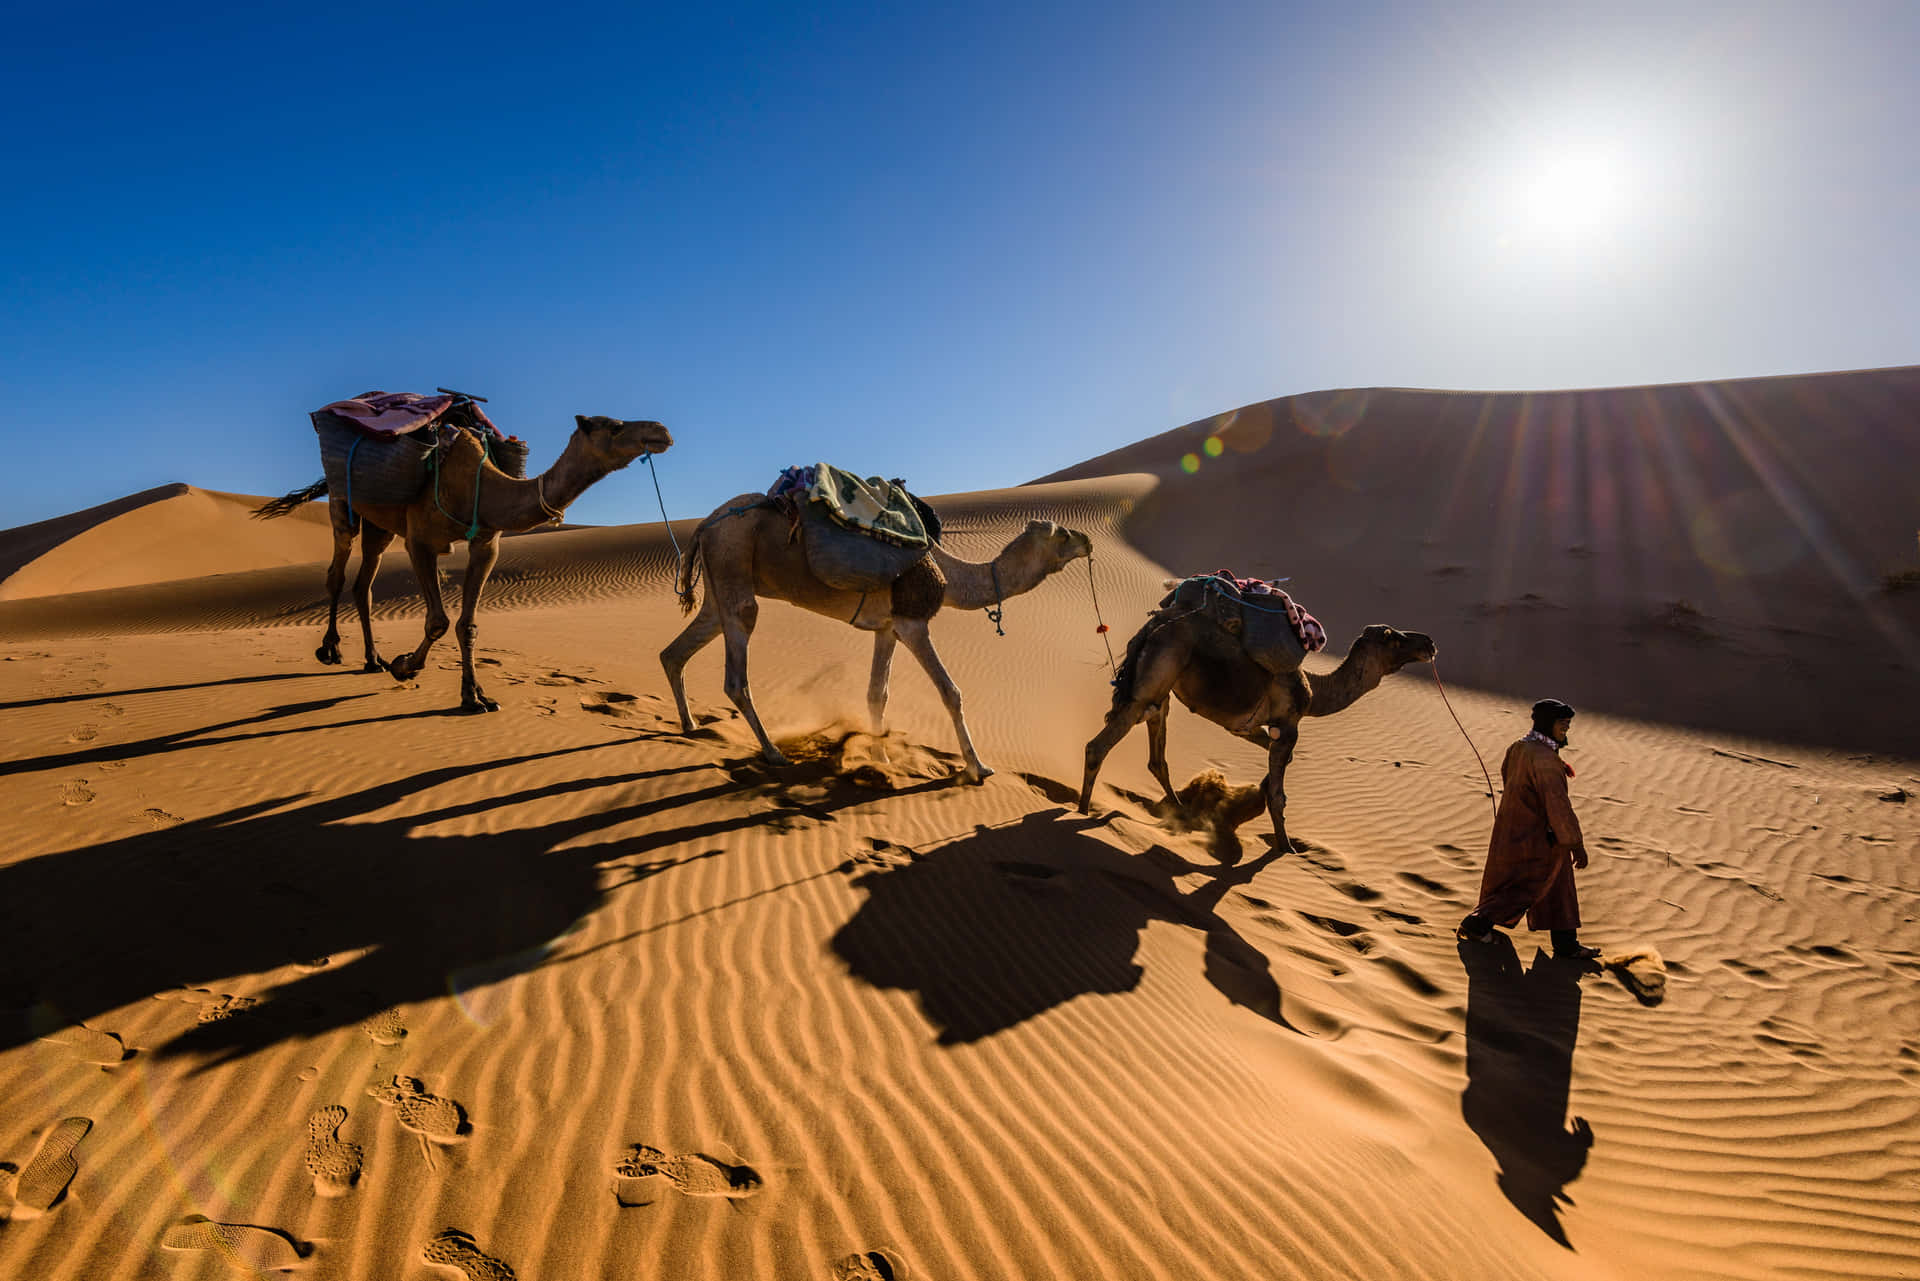 Man Lead Three Camels In Desert Picture